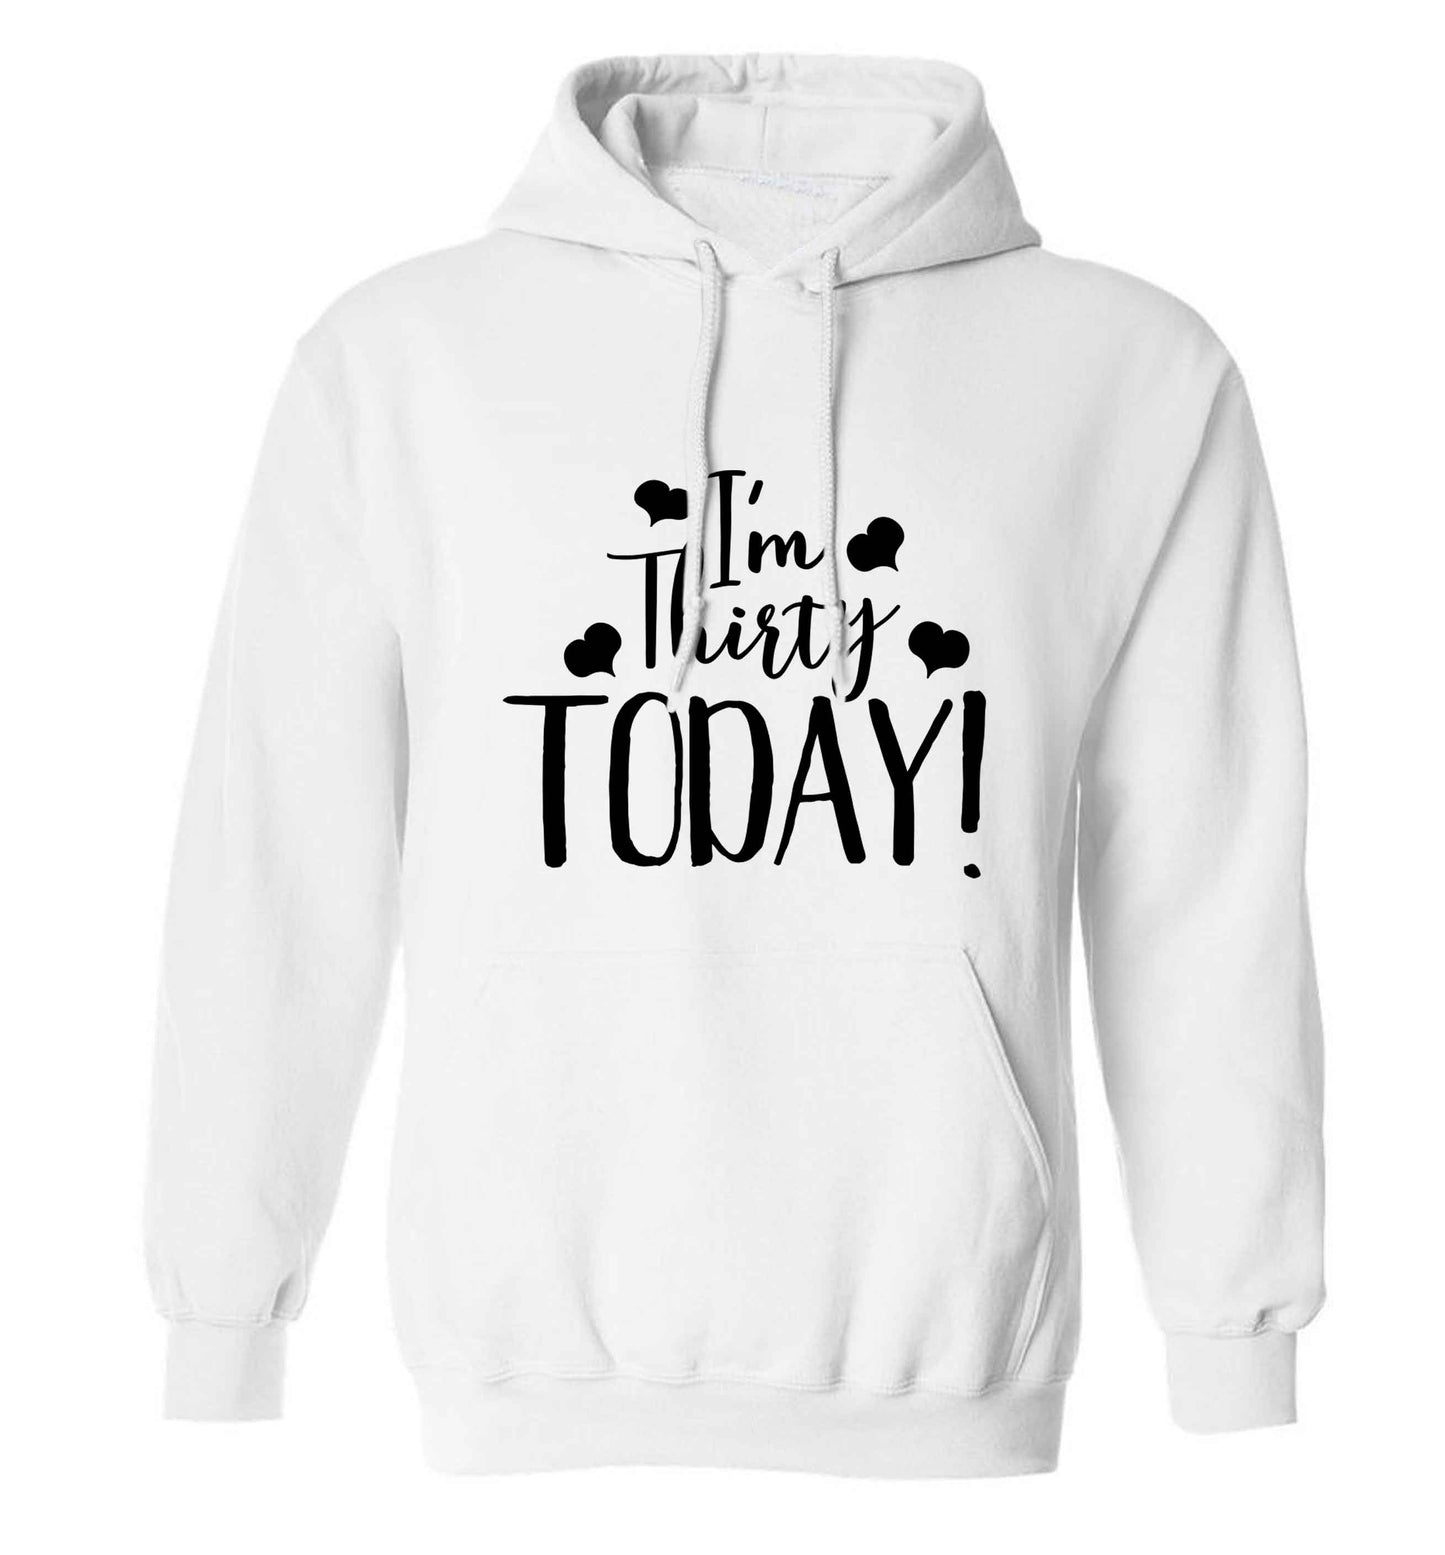 I'm thirty today! adults unisex white hoodie 2XL